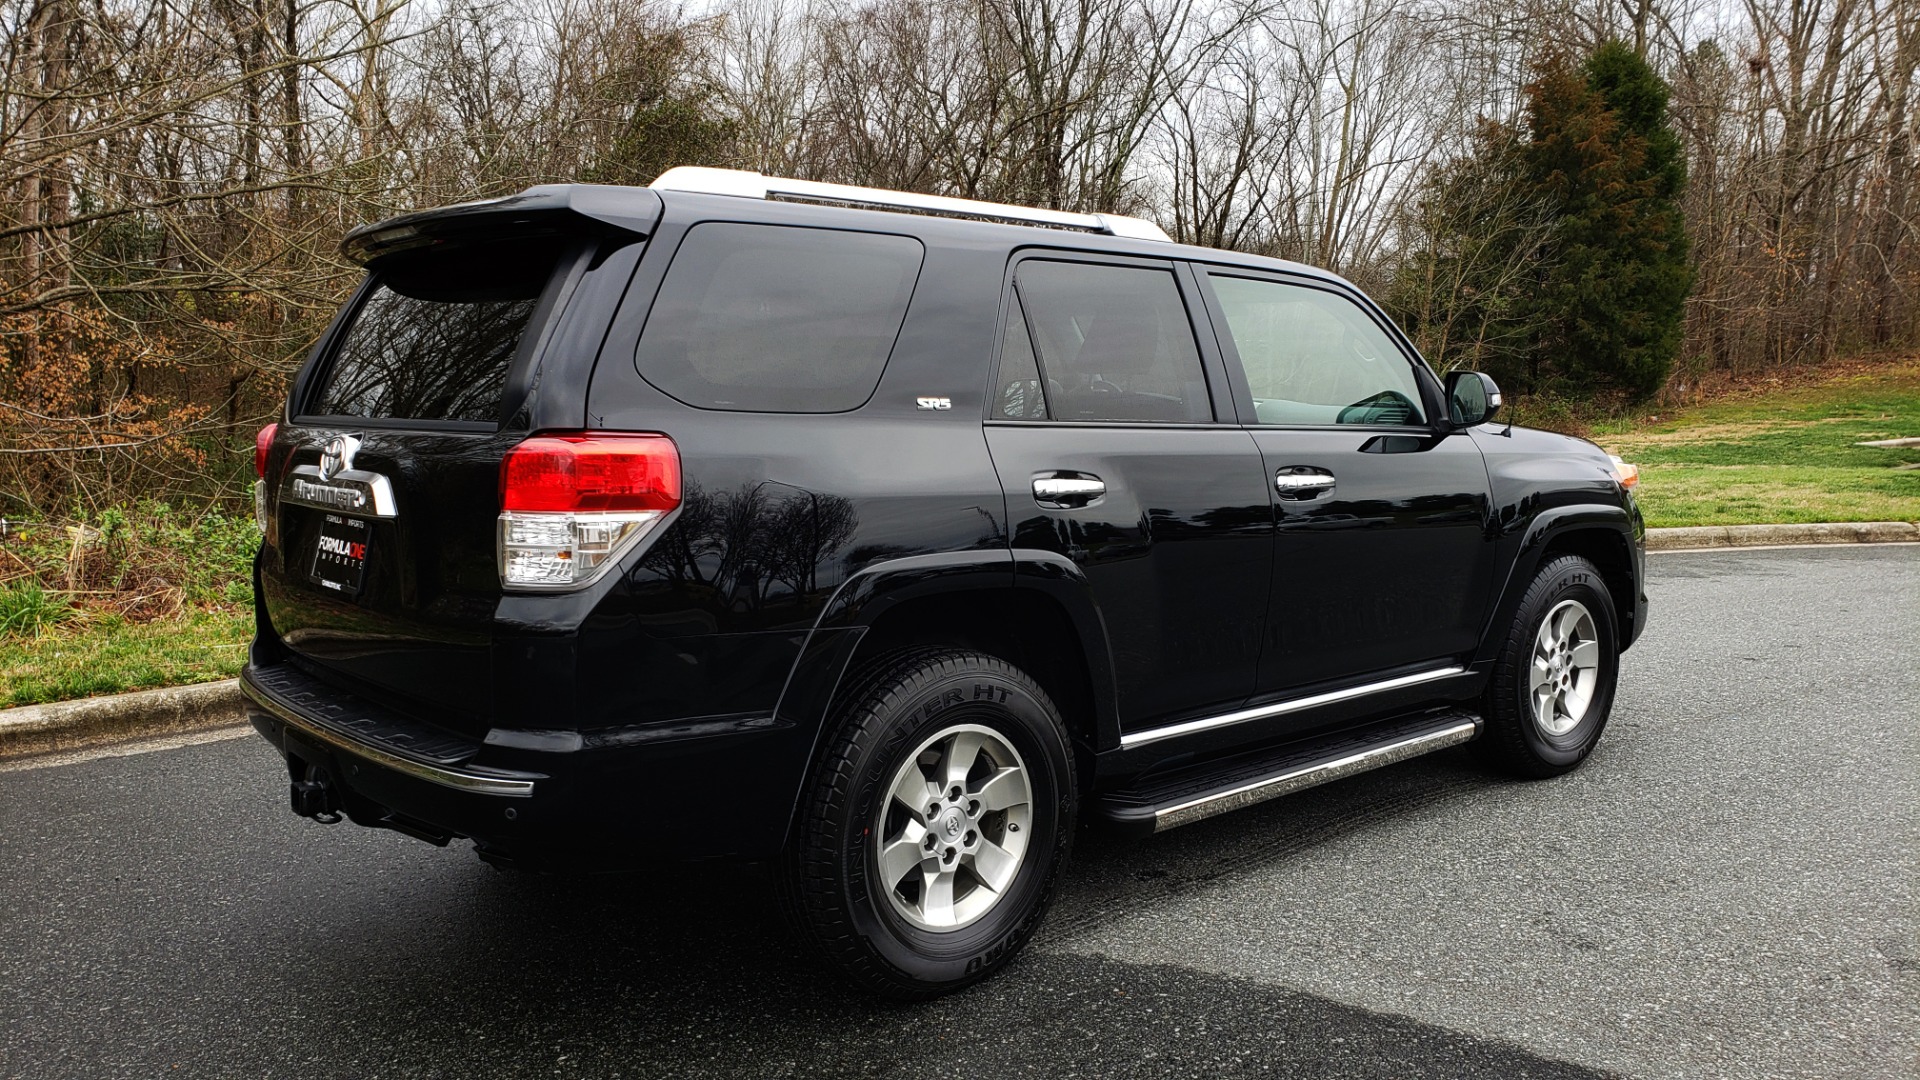 Used 2011 Toyota 4RUNNER SR5 2WD / 5-SPD AUTO / 4.0L V6 / SAT RADIO / PWR STS for sale Sold at Formula Imports in Charlotte NC 28227 6